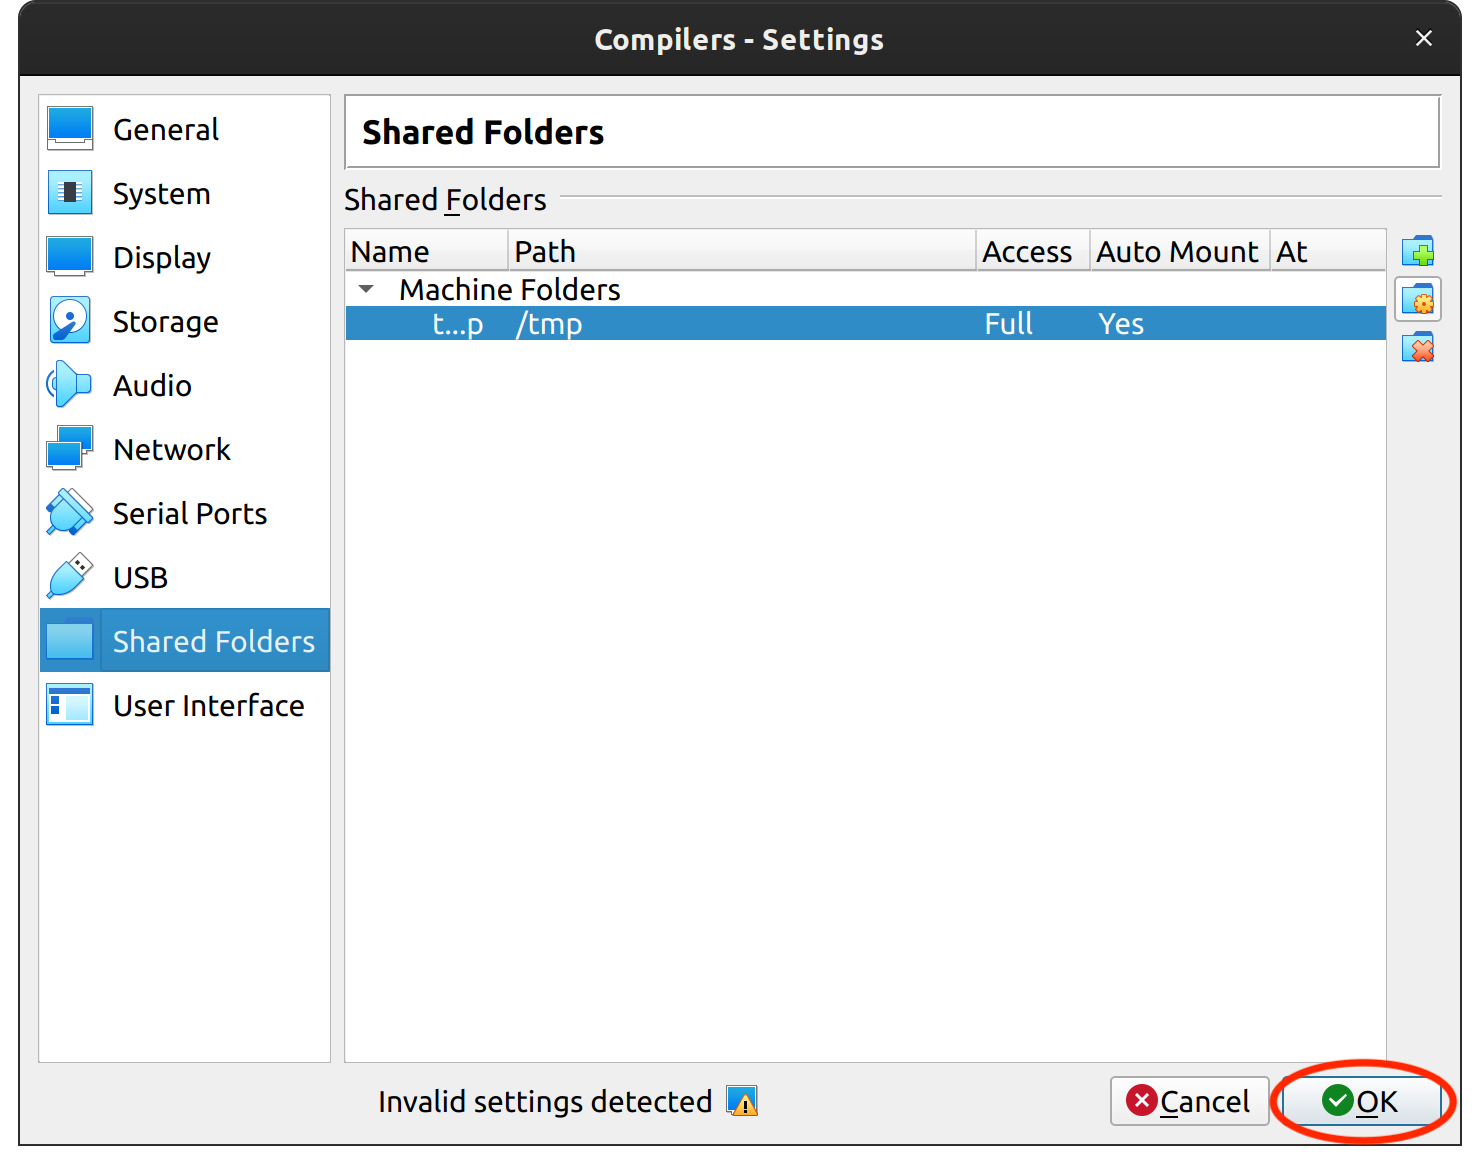 An image of the VirtualBox settings menu with the "Ok" button circled in red